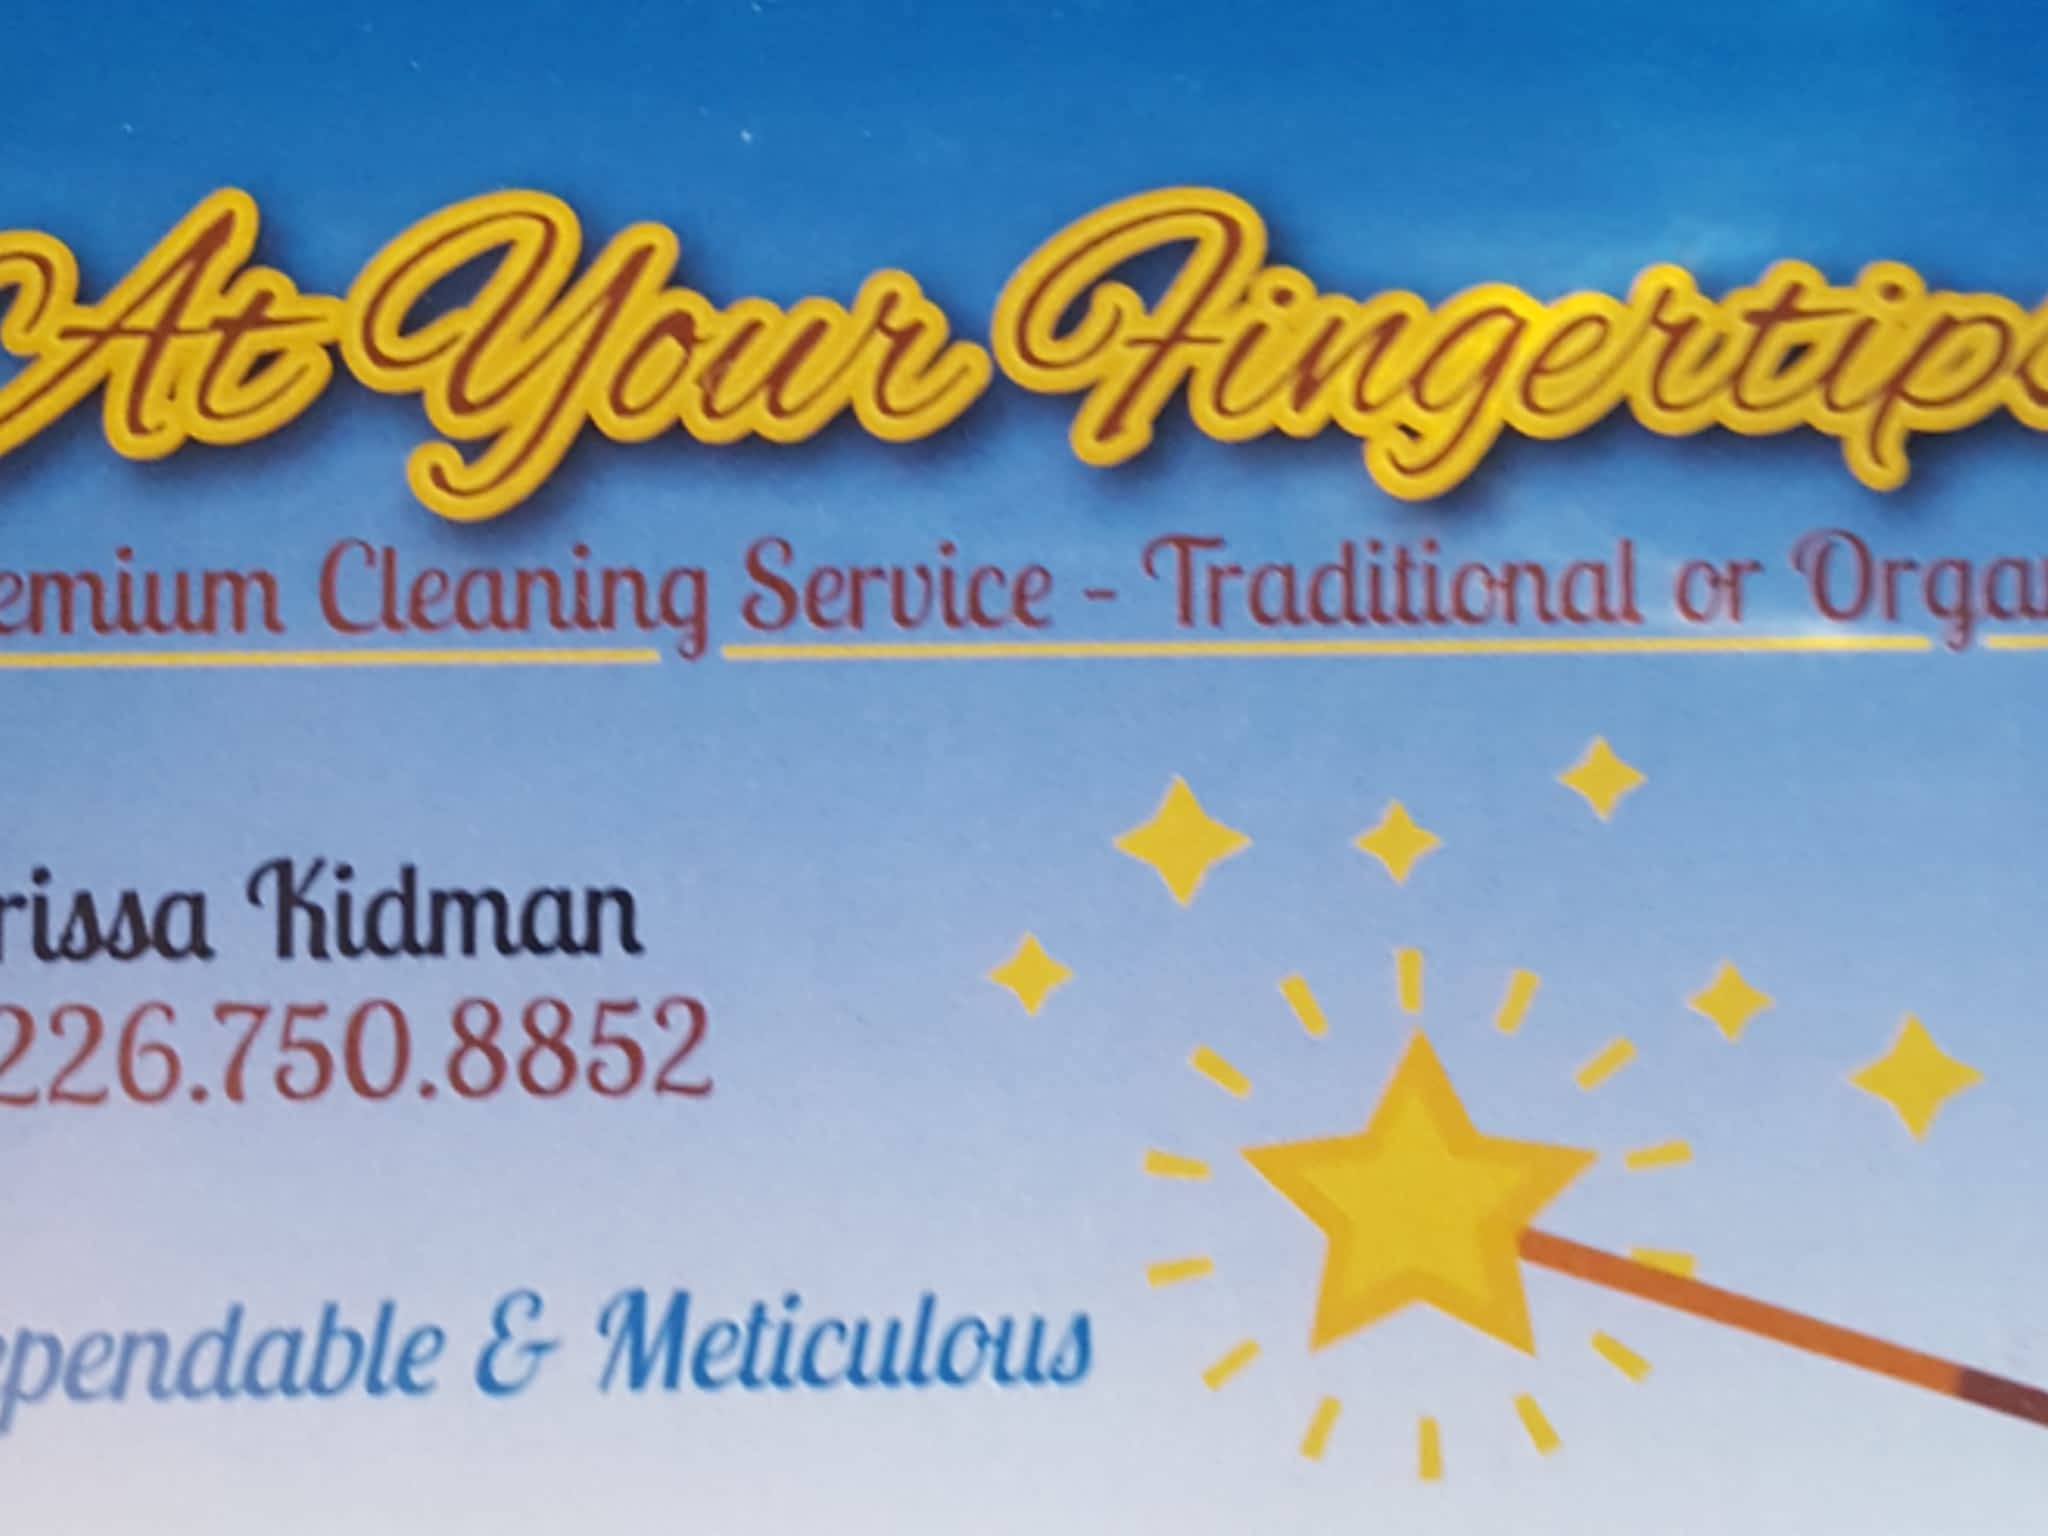 photo At Your Fingertips - Premium Cleaning Service